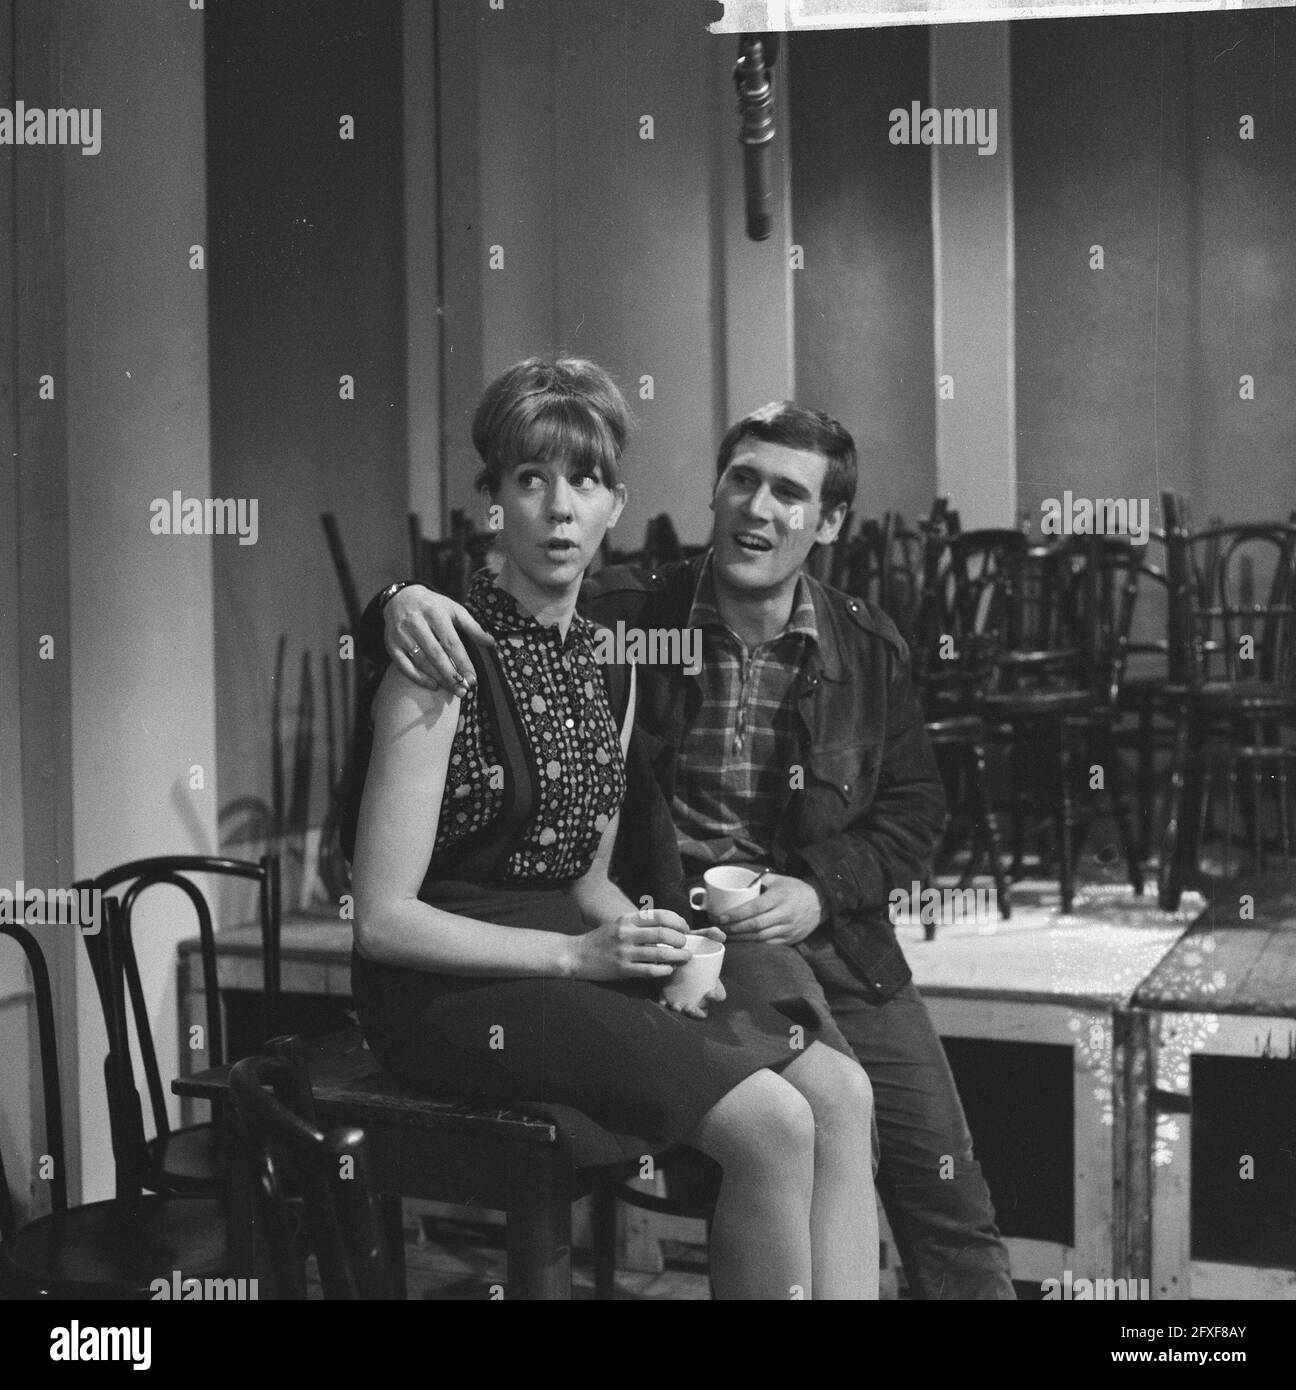 TV series Ceasar and Cleo, next Thursday tenth episode, Jules Hamel (r) and Lettie Oosthoek, March 22, 1966, actors, programs, television, stage actors, television series, The Netherlands, 20th century press agency photo, news to remember, documentary, historic photography 1945-1990, visual stories, human history of the Twentieth Century, capturing moments in time Stock Photo